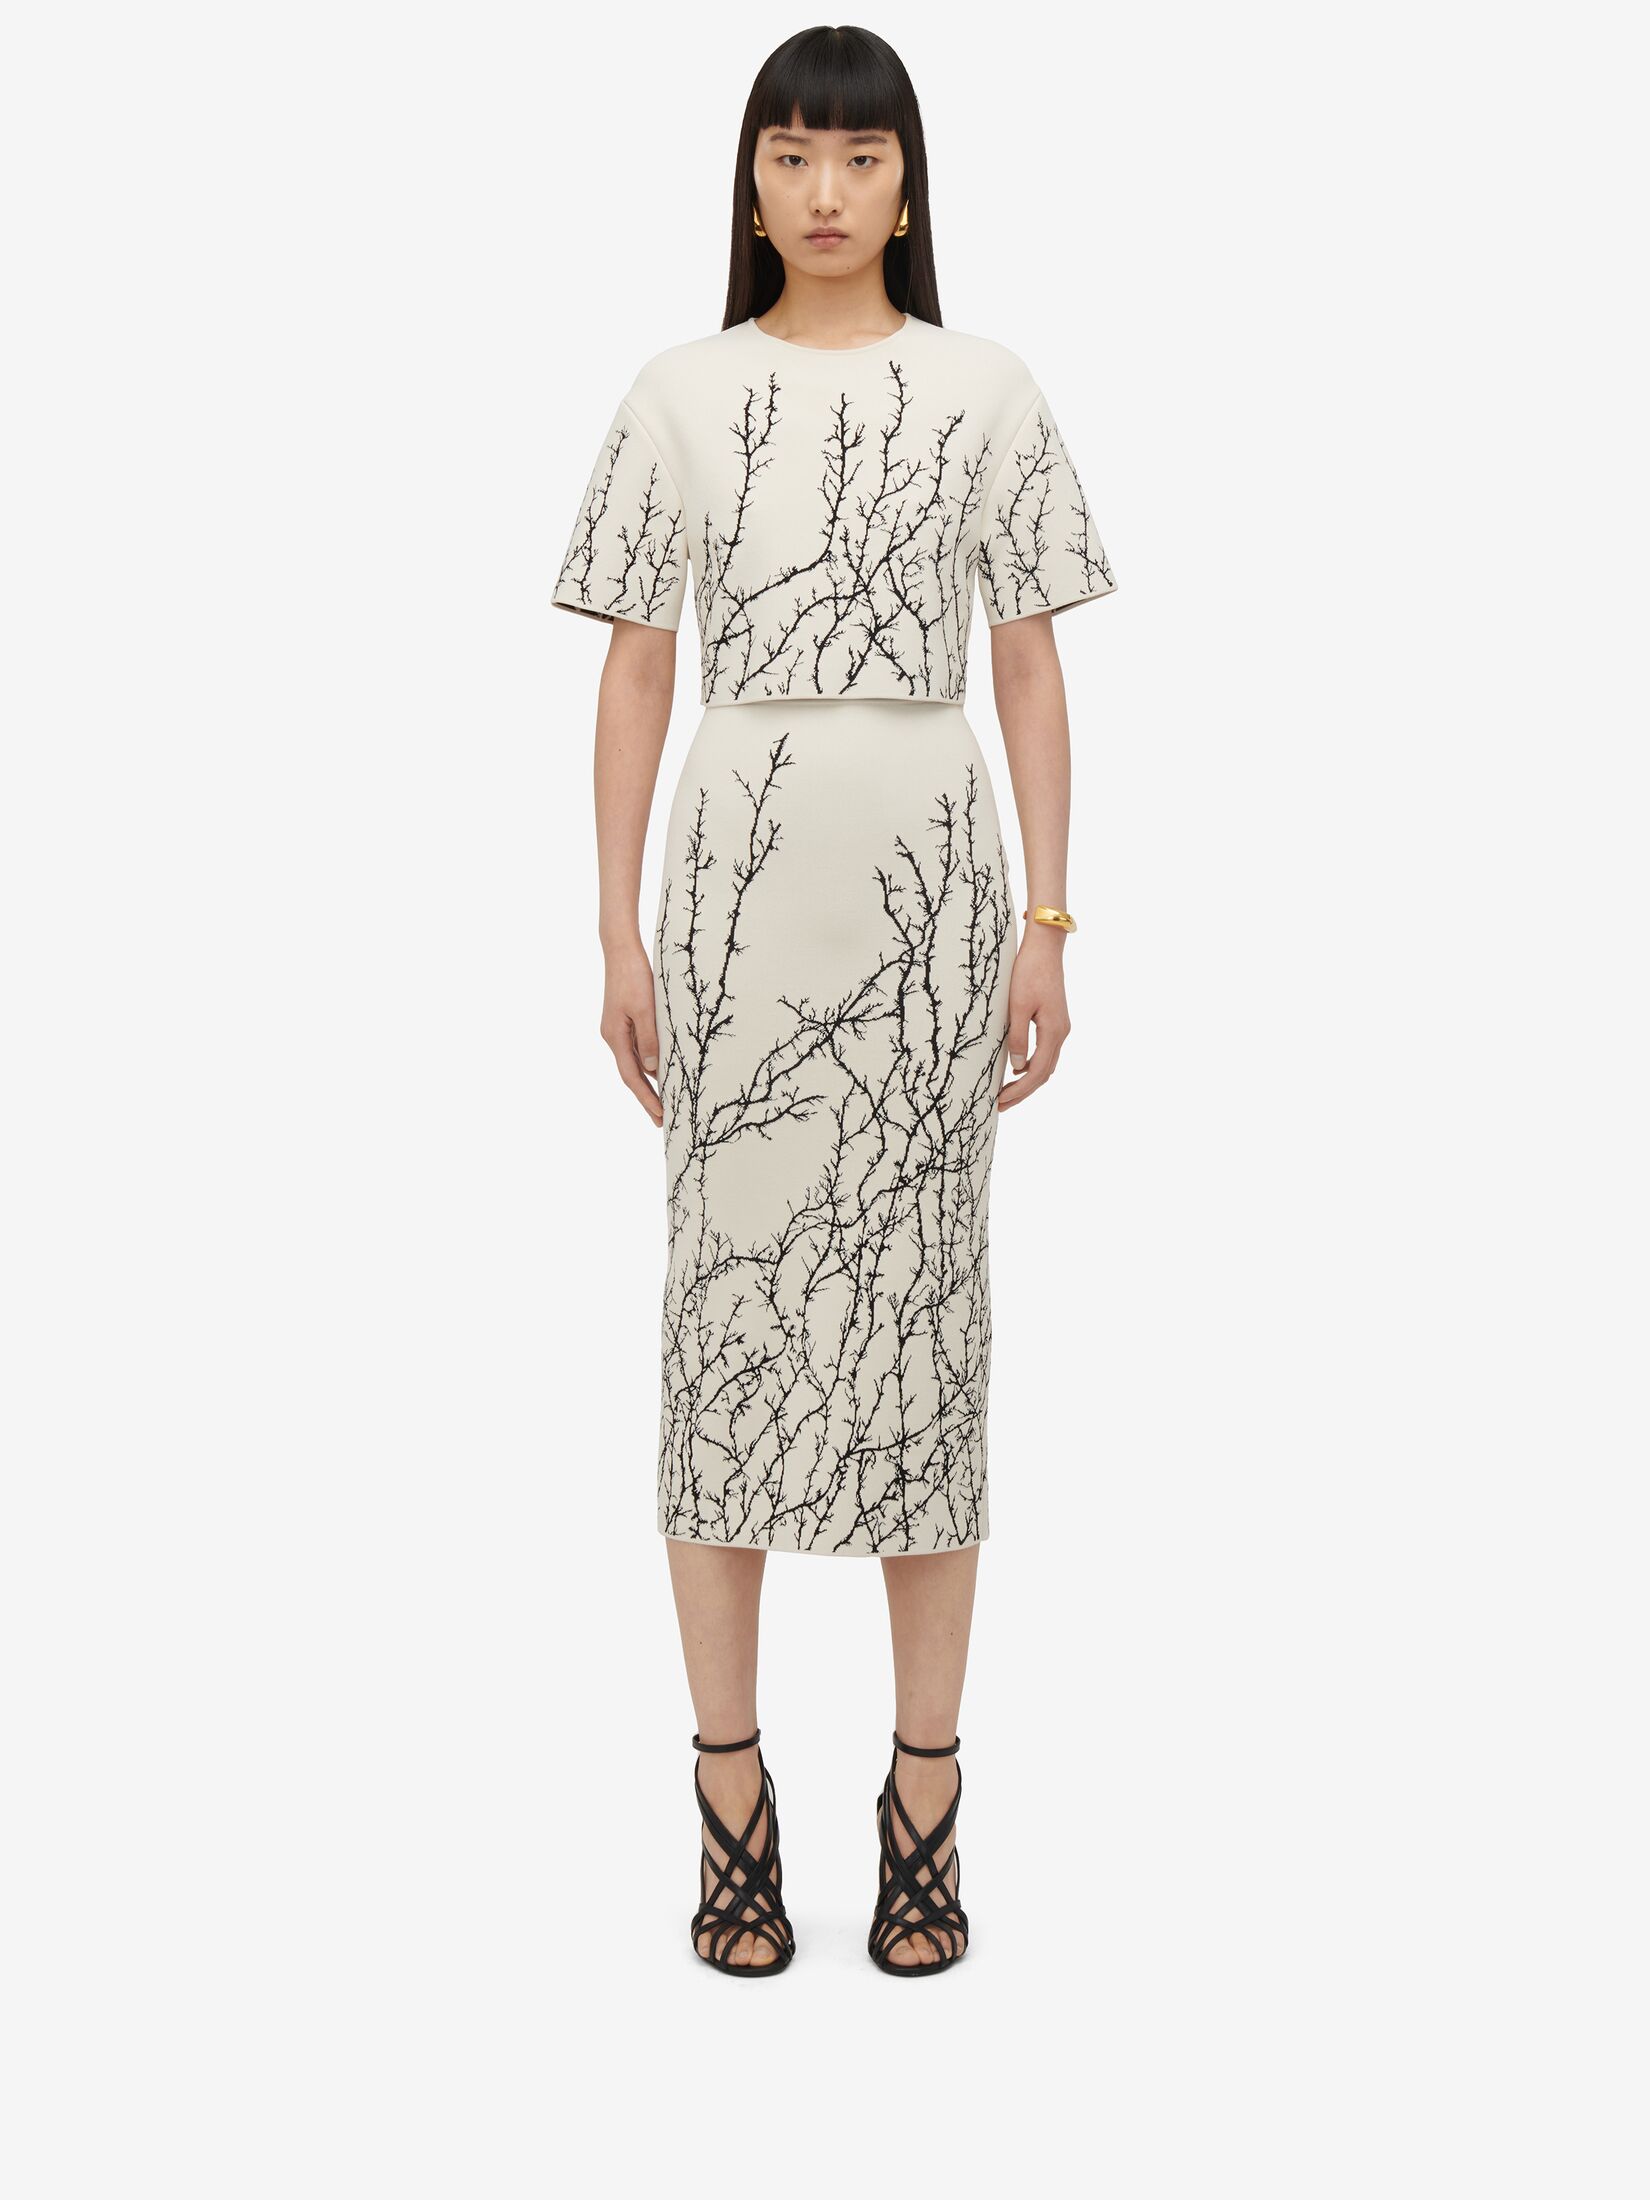 Thorn Branches Pencil Skirt